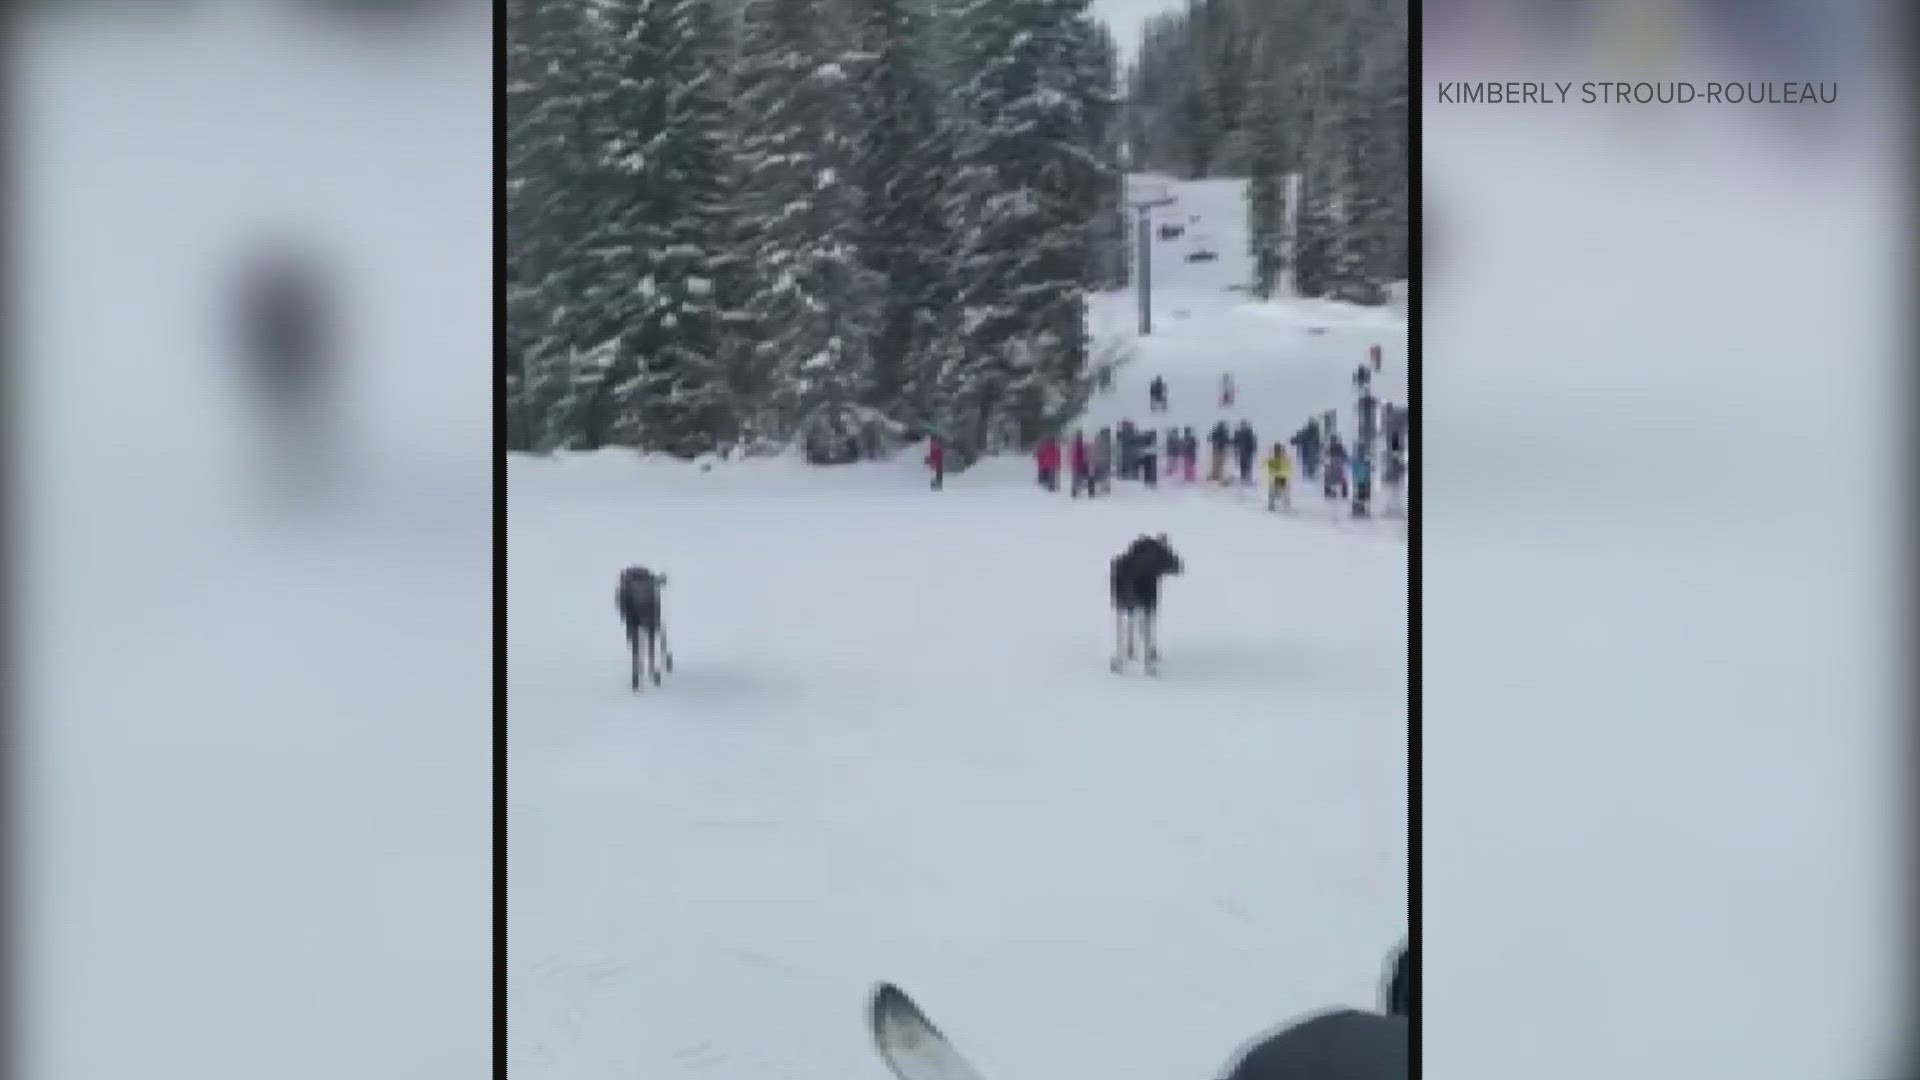 The moose wandered onto the slopes at Winter Park Saturday morning.